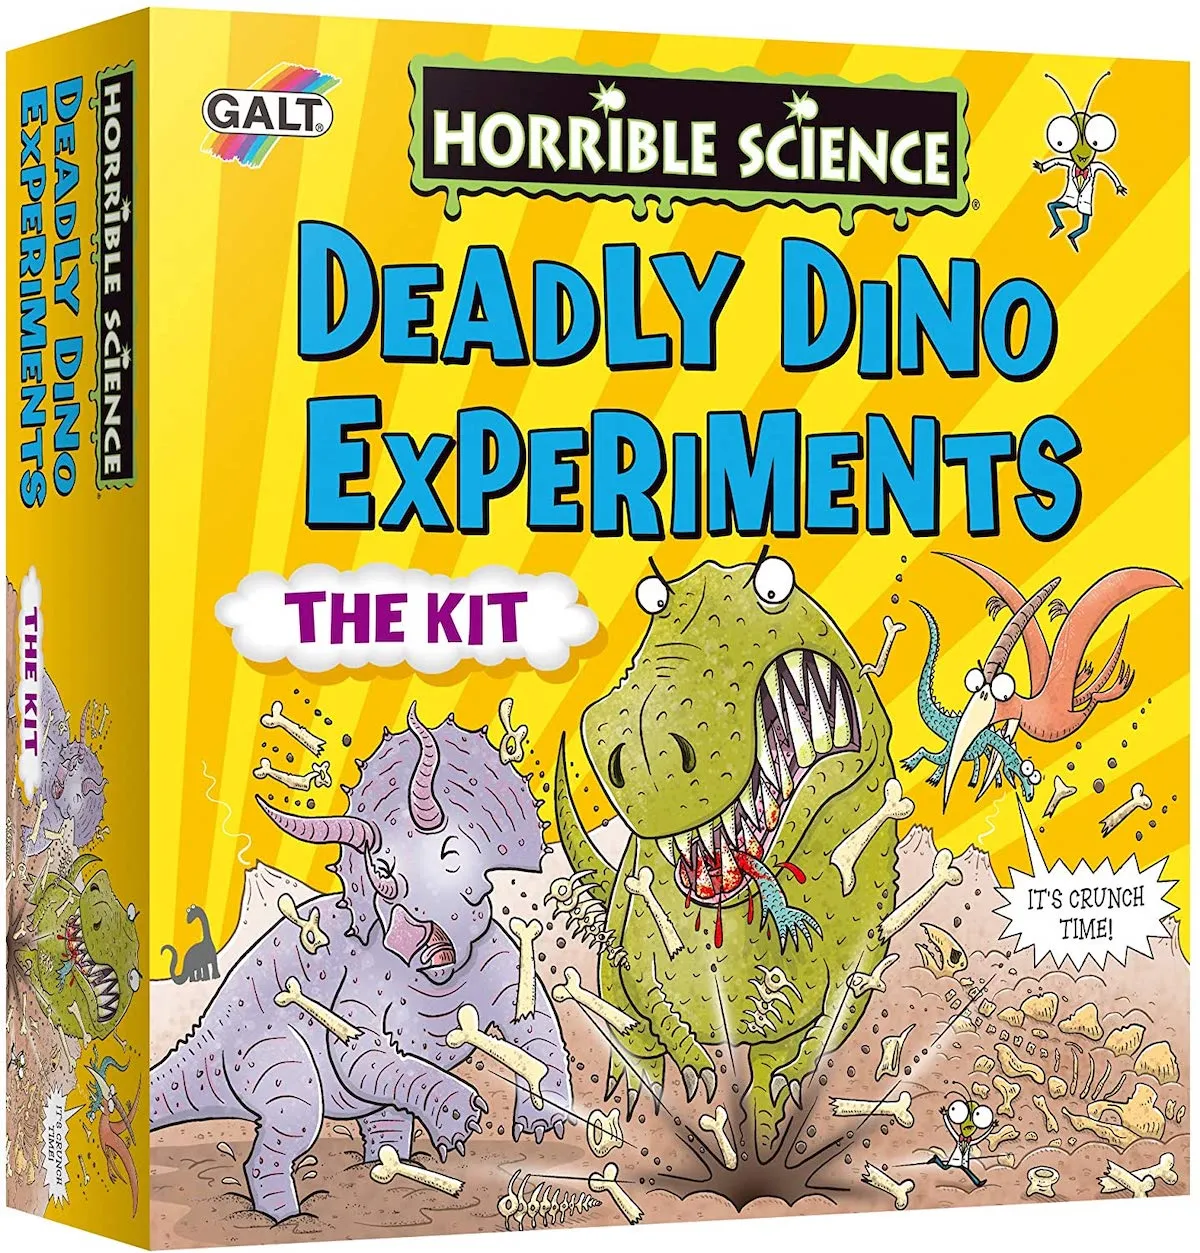 Best dinosaur toys, Horrible Science Deadly Dino Experiments